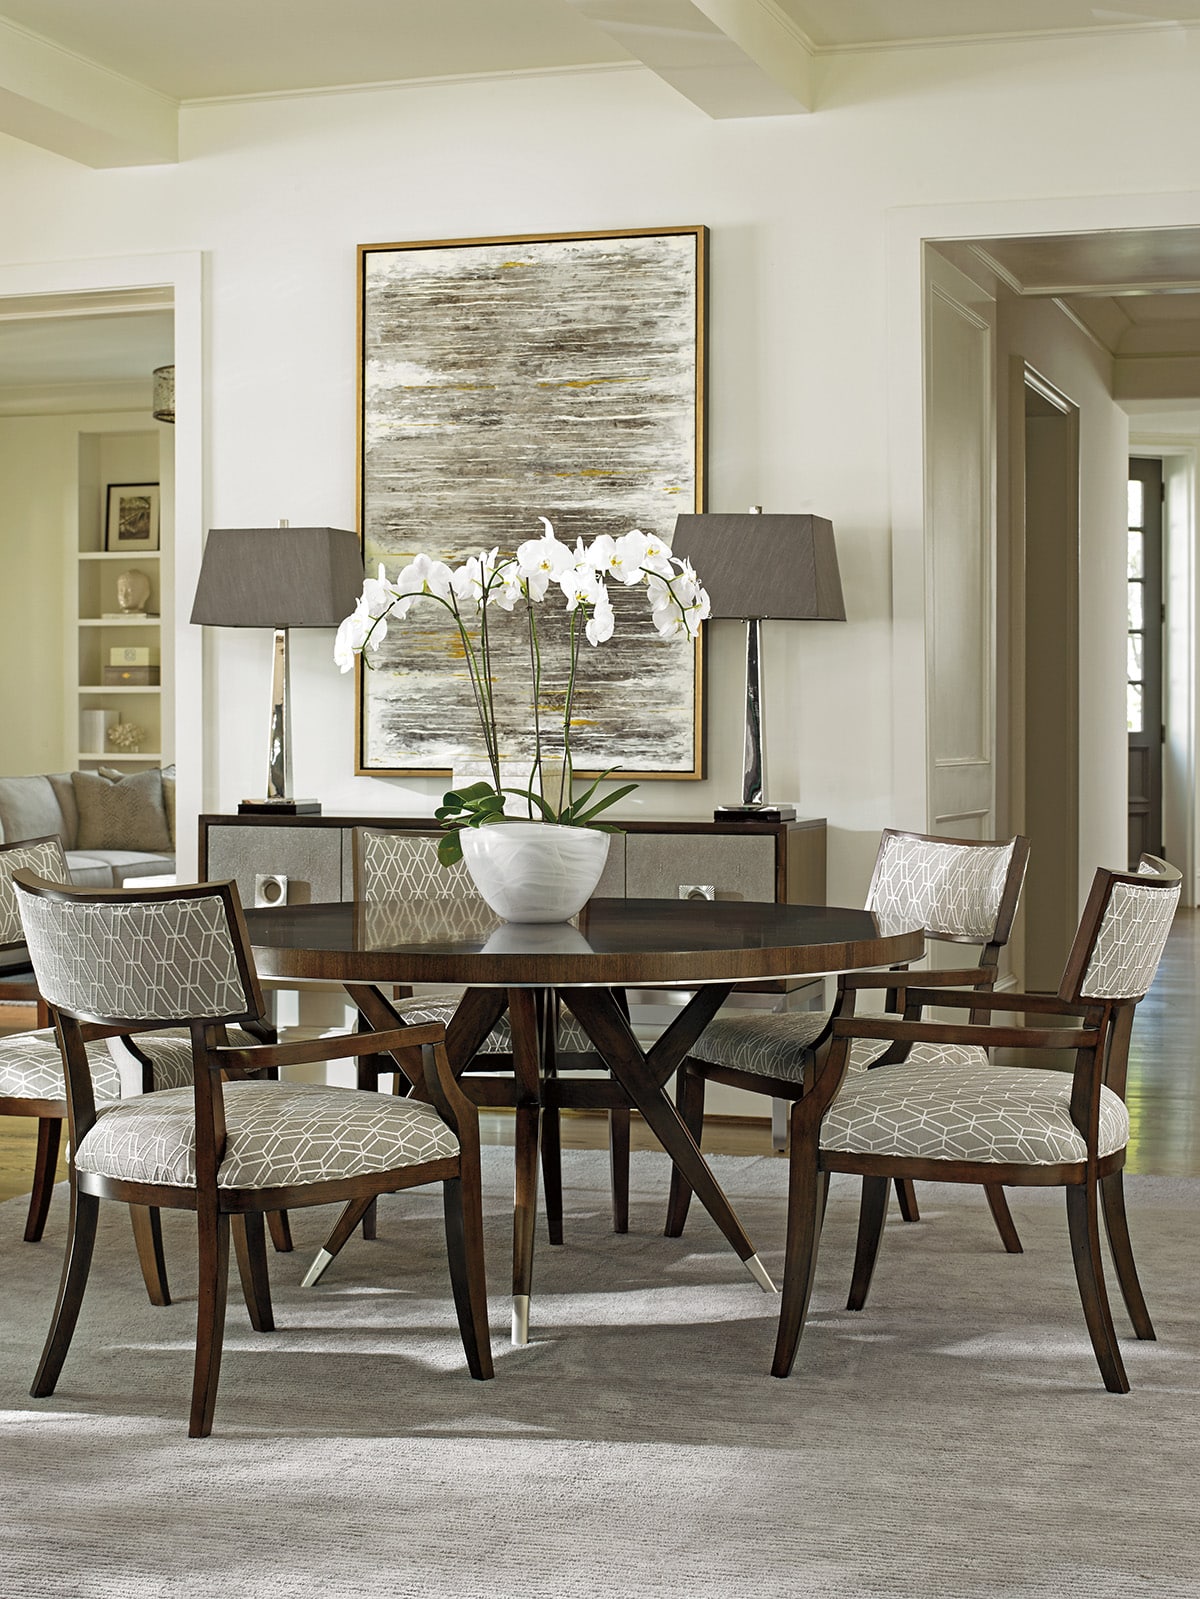 Introducing MacArthur Park: Classic contemporary furniture for today's new traditionalists